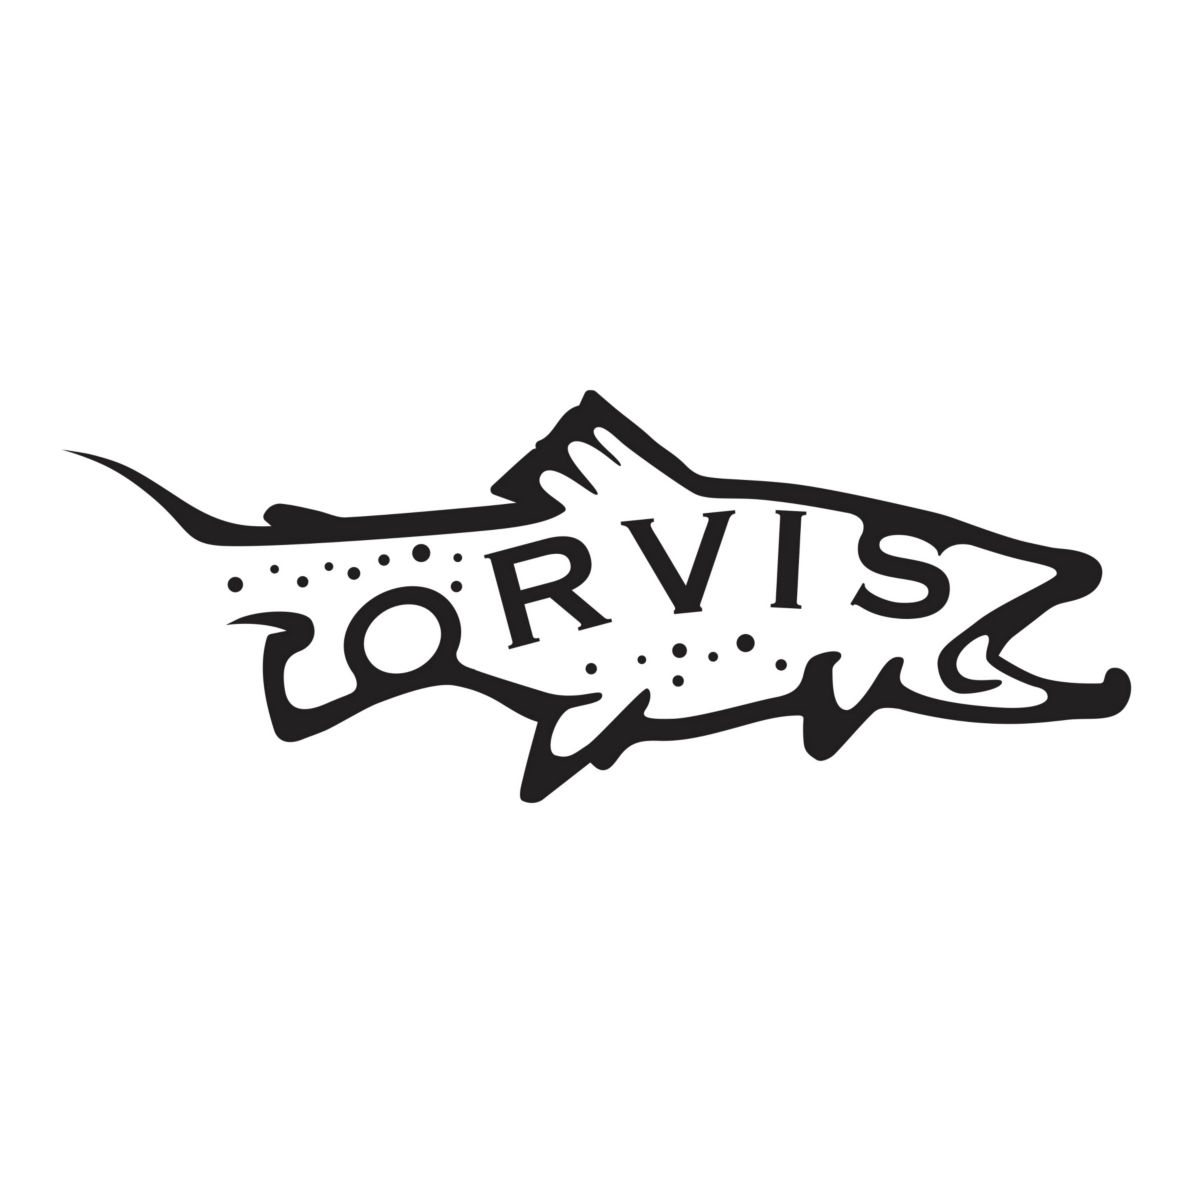 ORVIS Fly Fishing Tackle & Gear Car SUV Vinyl Die Cut Sticker Decal White 6.5 In 